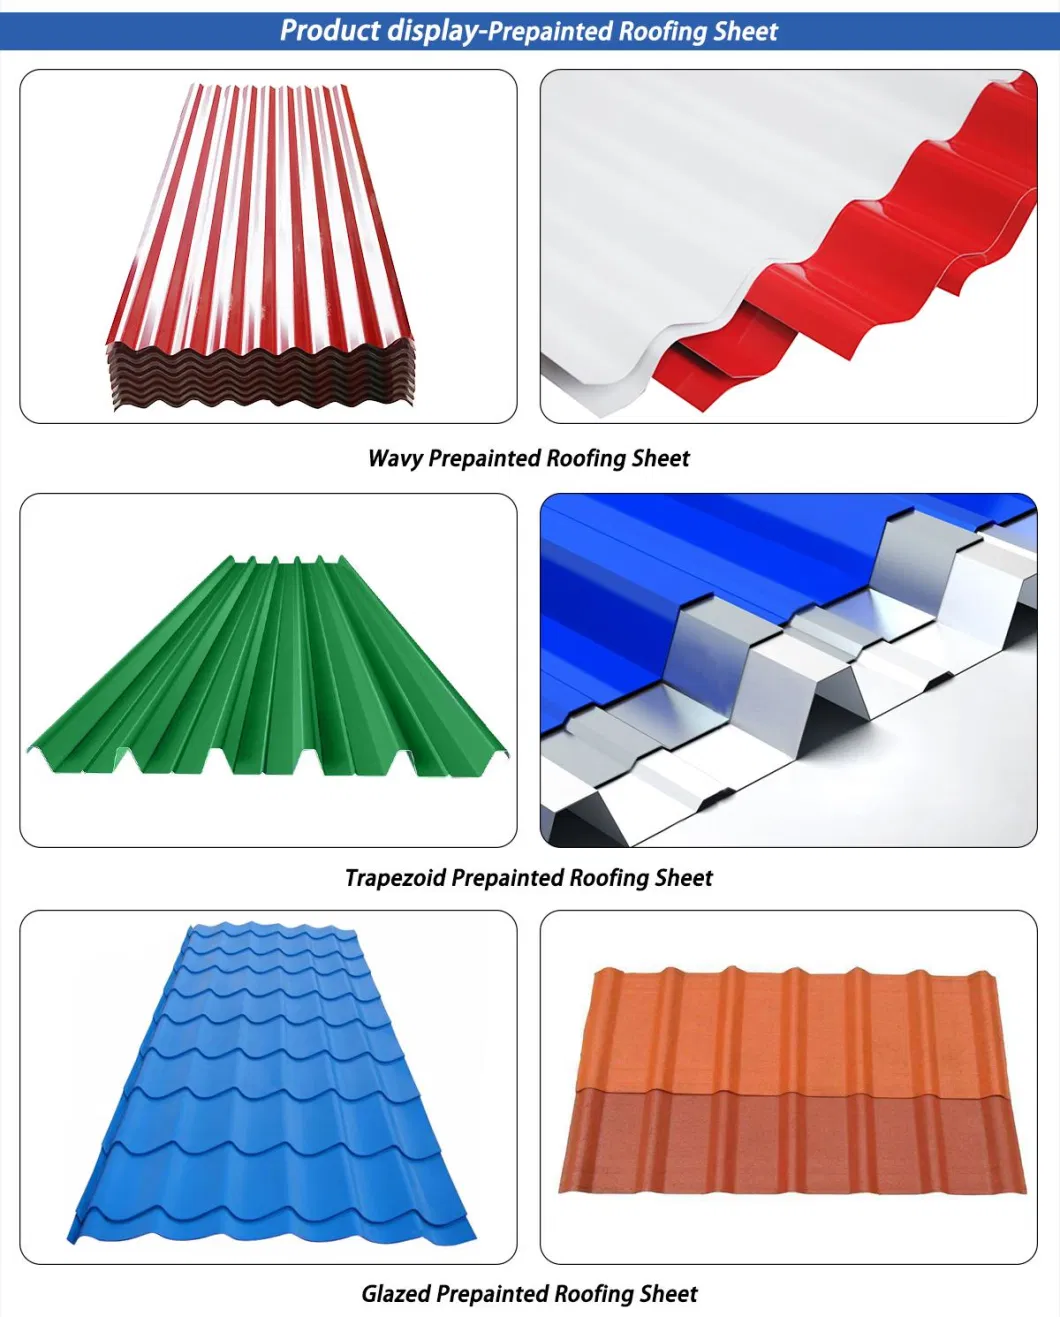 Wholesale ASTM Standard Zinc Coated Roof Galvanized Steel Corrugated Roofing Sheet